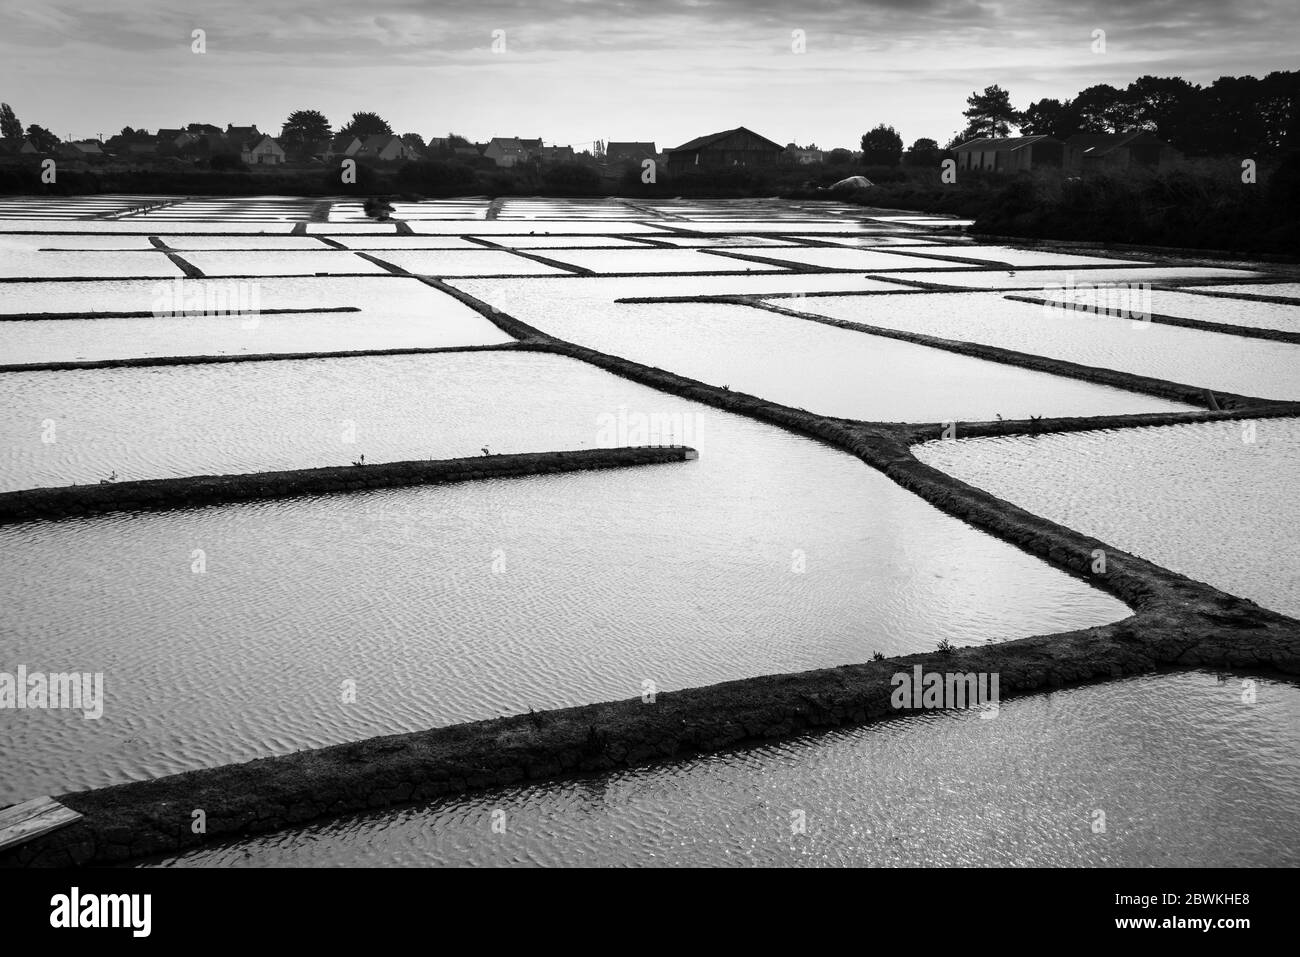 Graphic landscape of salt marshes in Guerande peninsula, France. Black and white photography Stock Photo